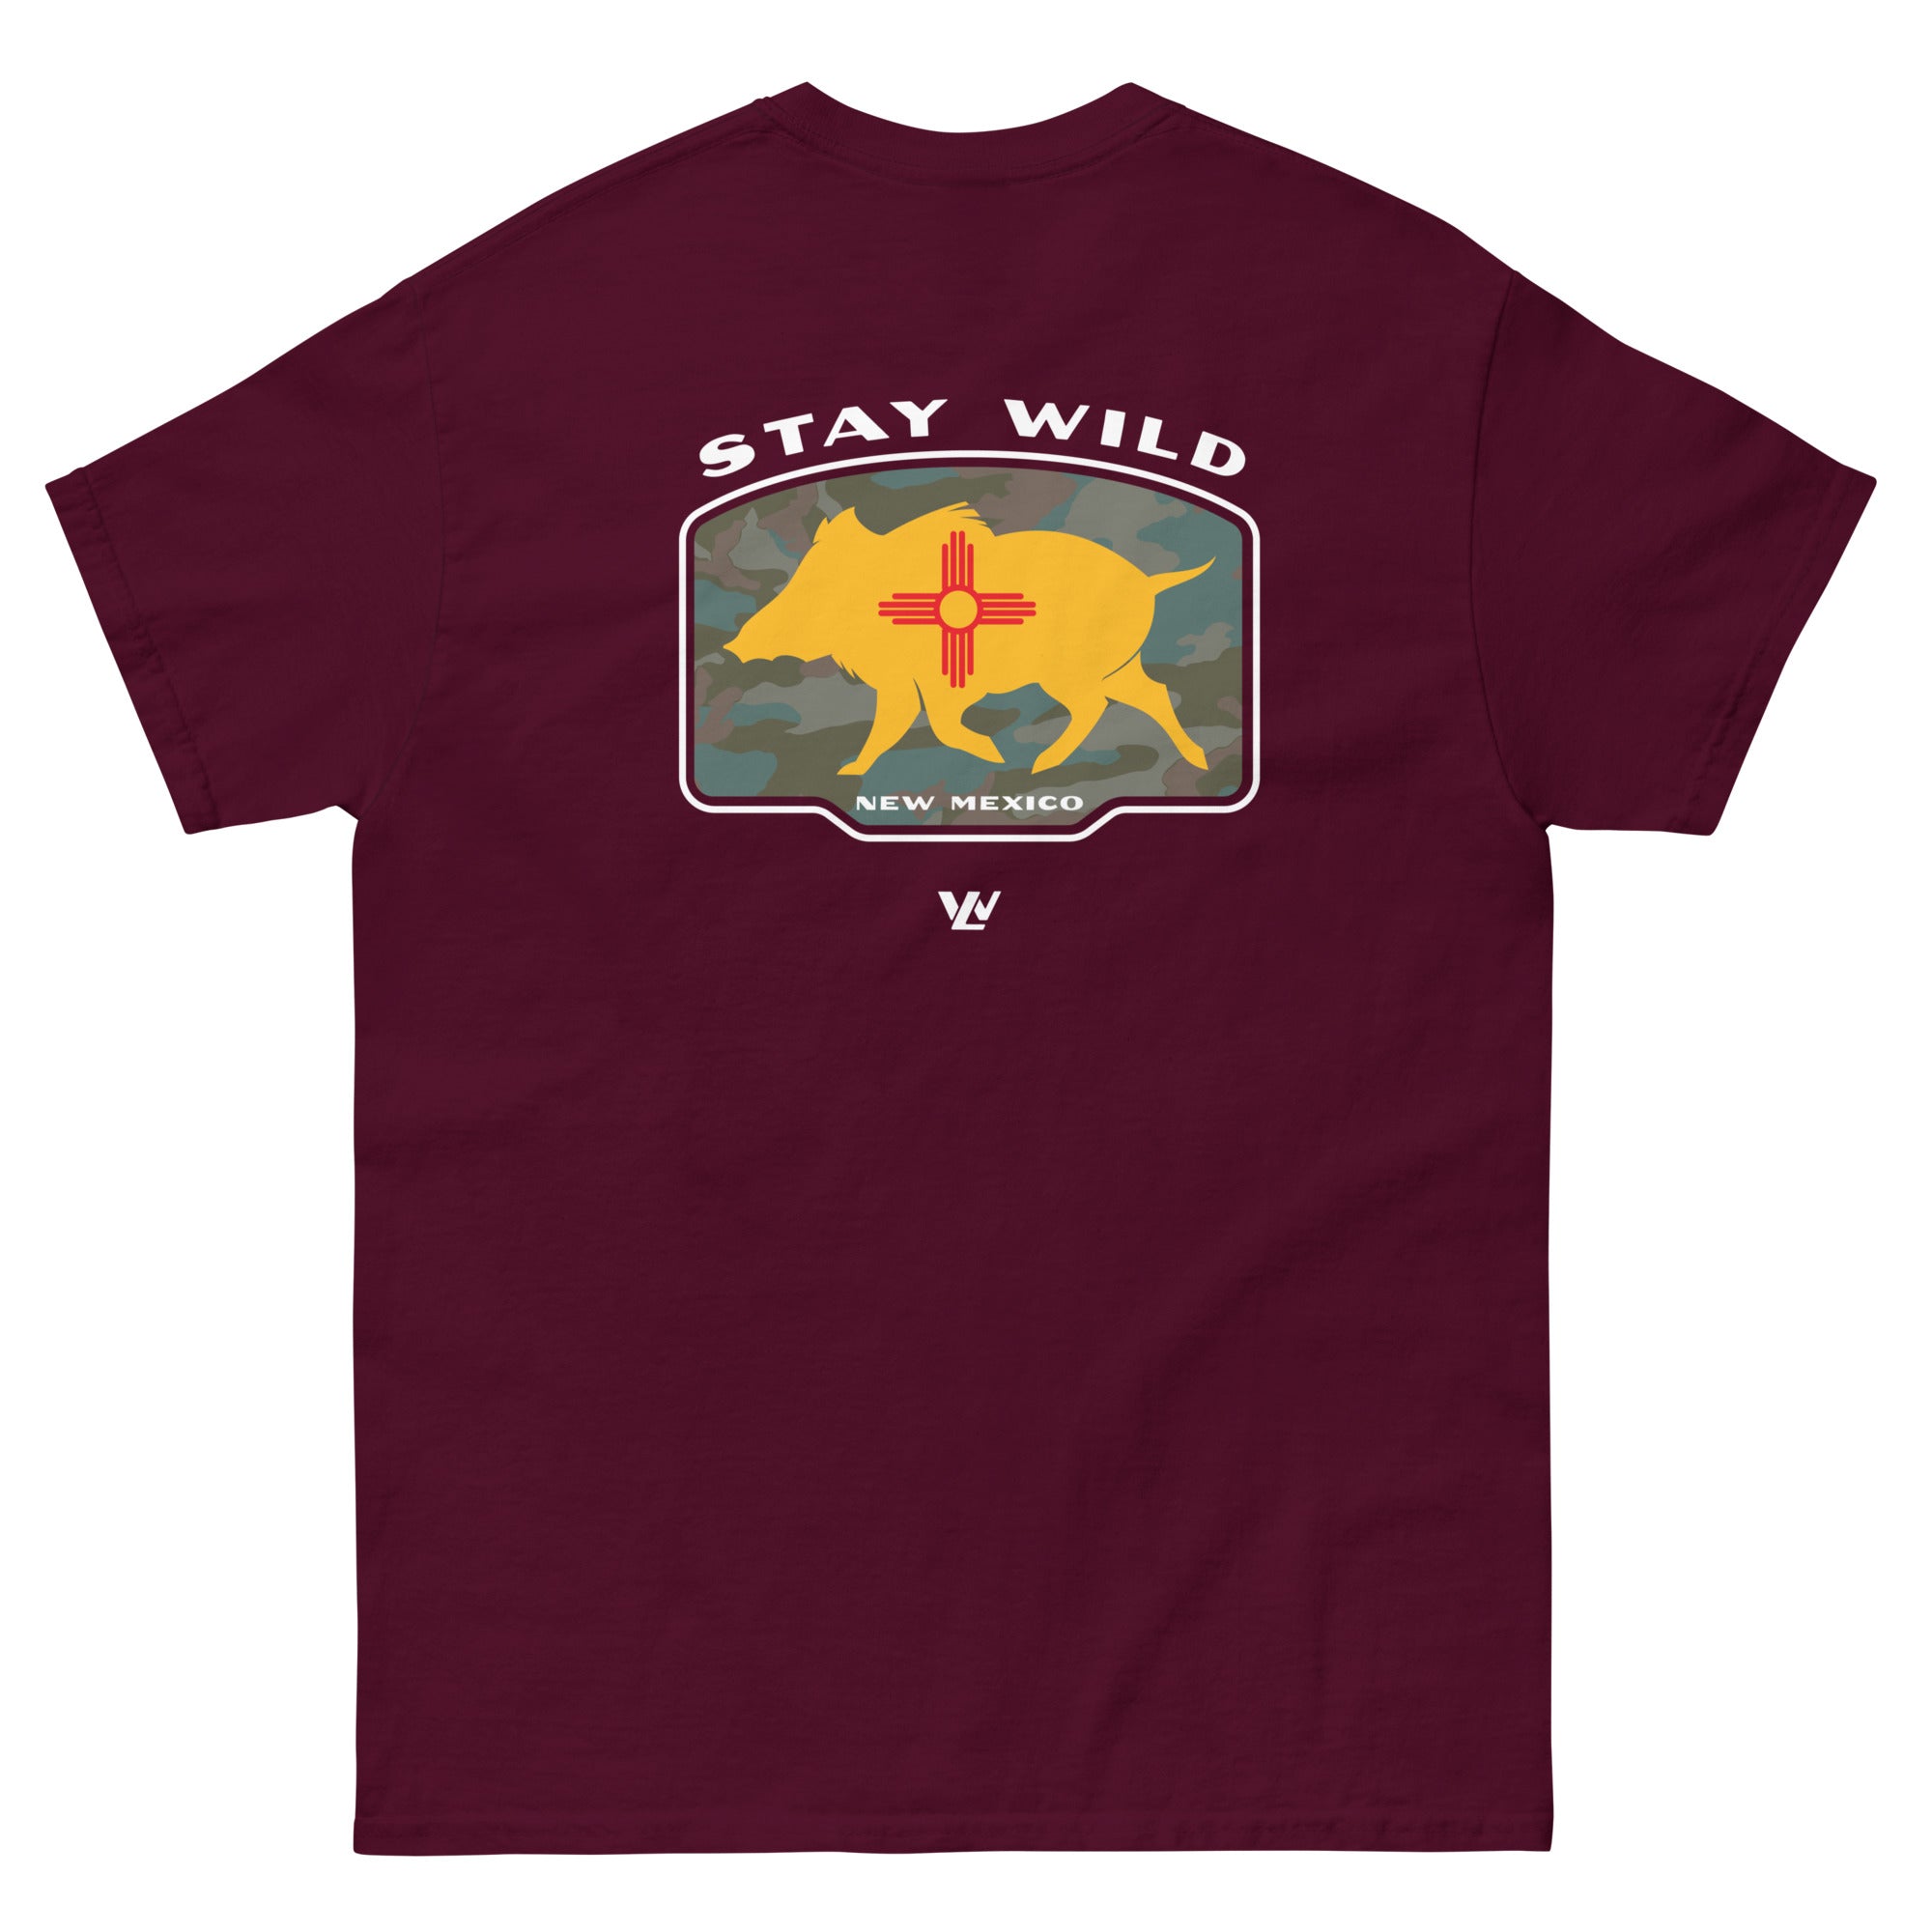 Stay Wild New Mexico T-Shirt - Wilding Life